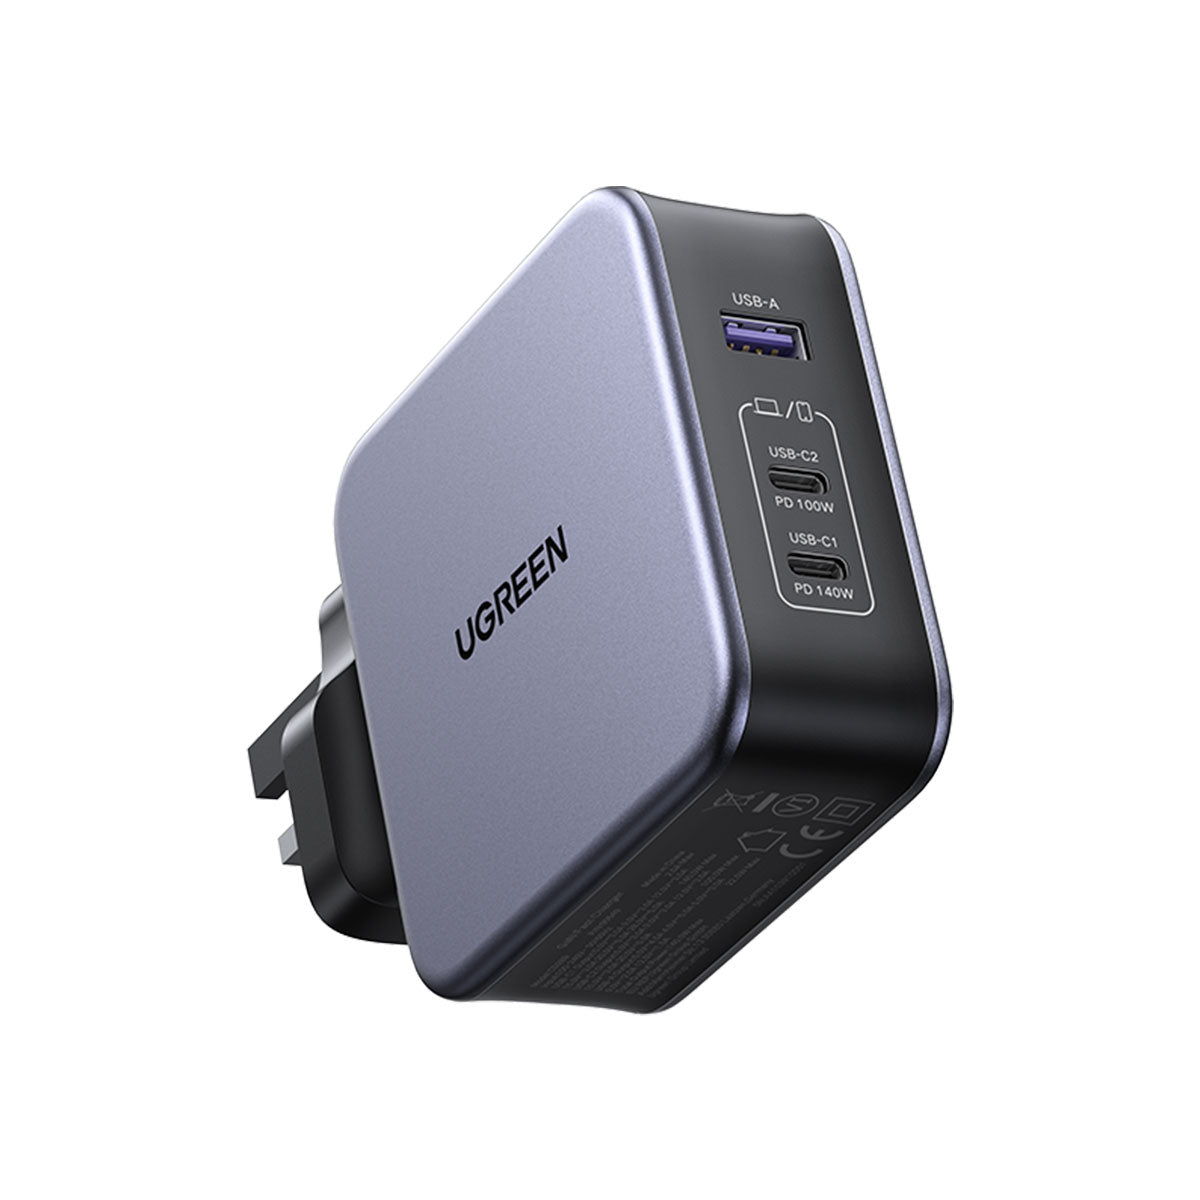 UGREEN GaN 140W USB Fast Wall Charger with Cable (3-Ports) 插牆式USB充電器 充電器 Microworks Online Store